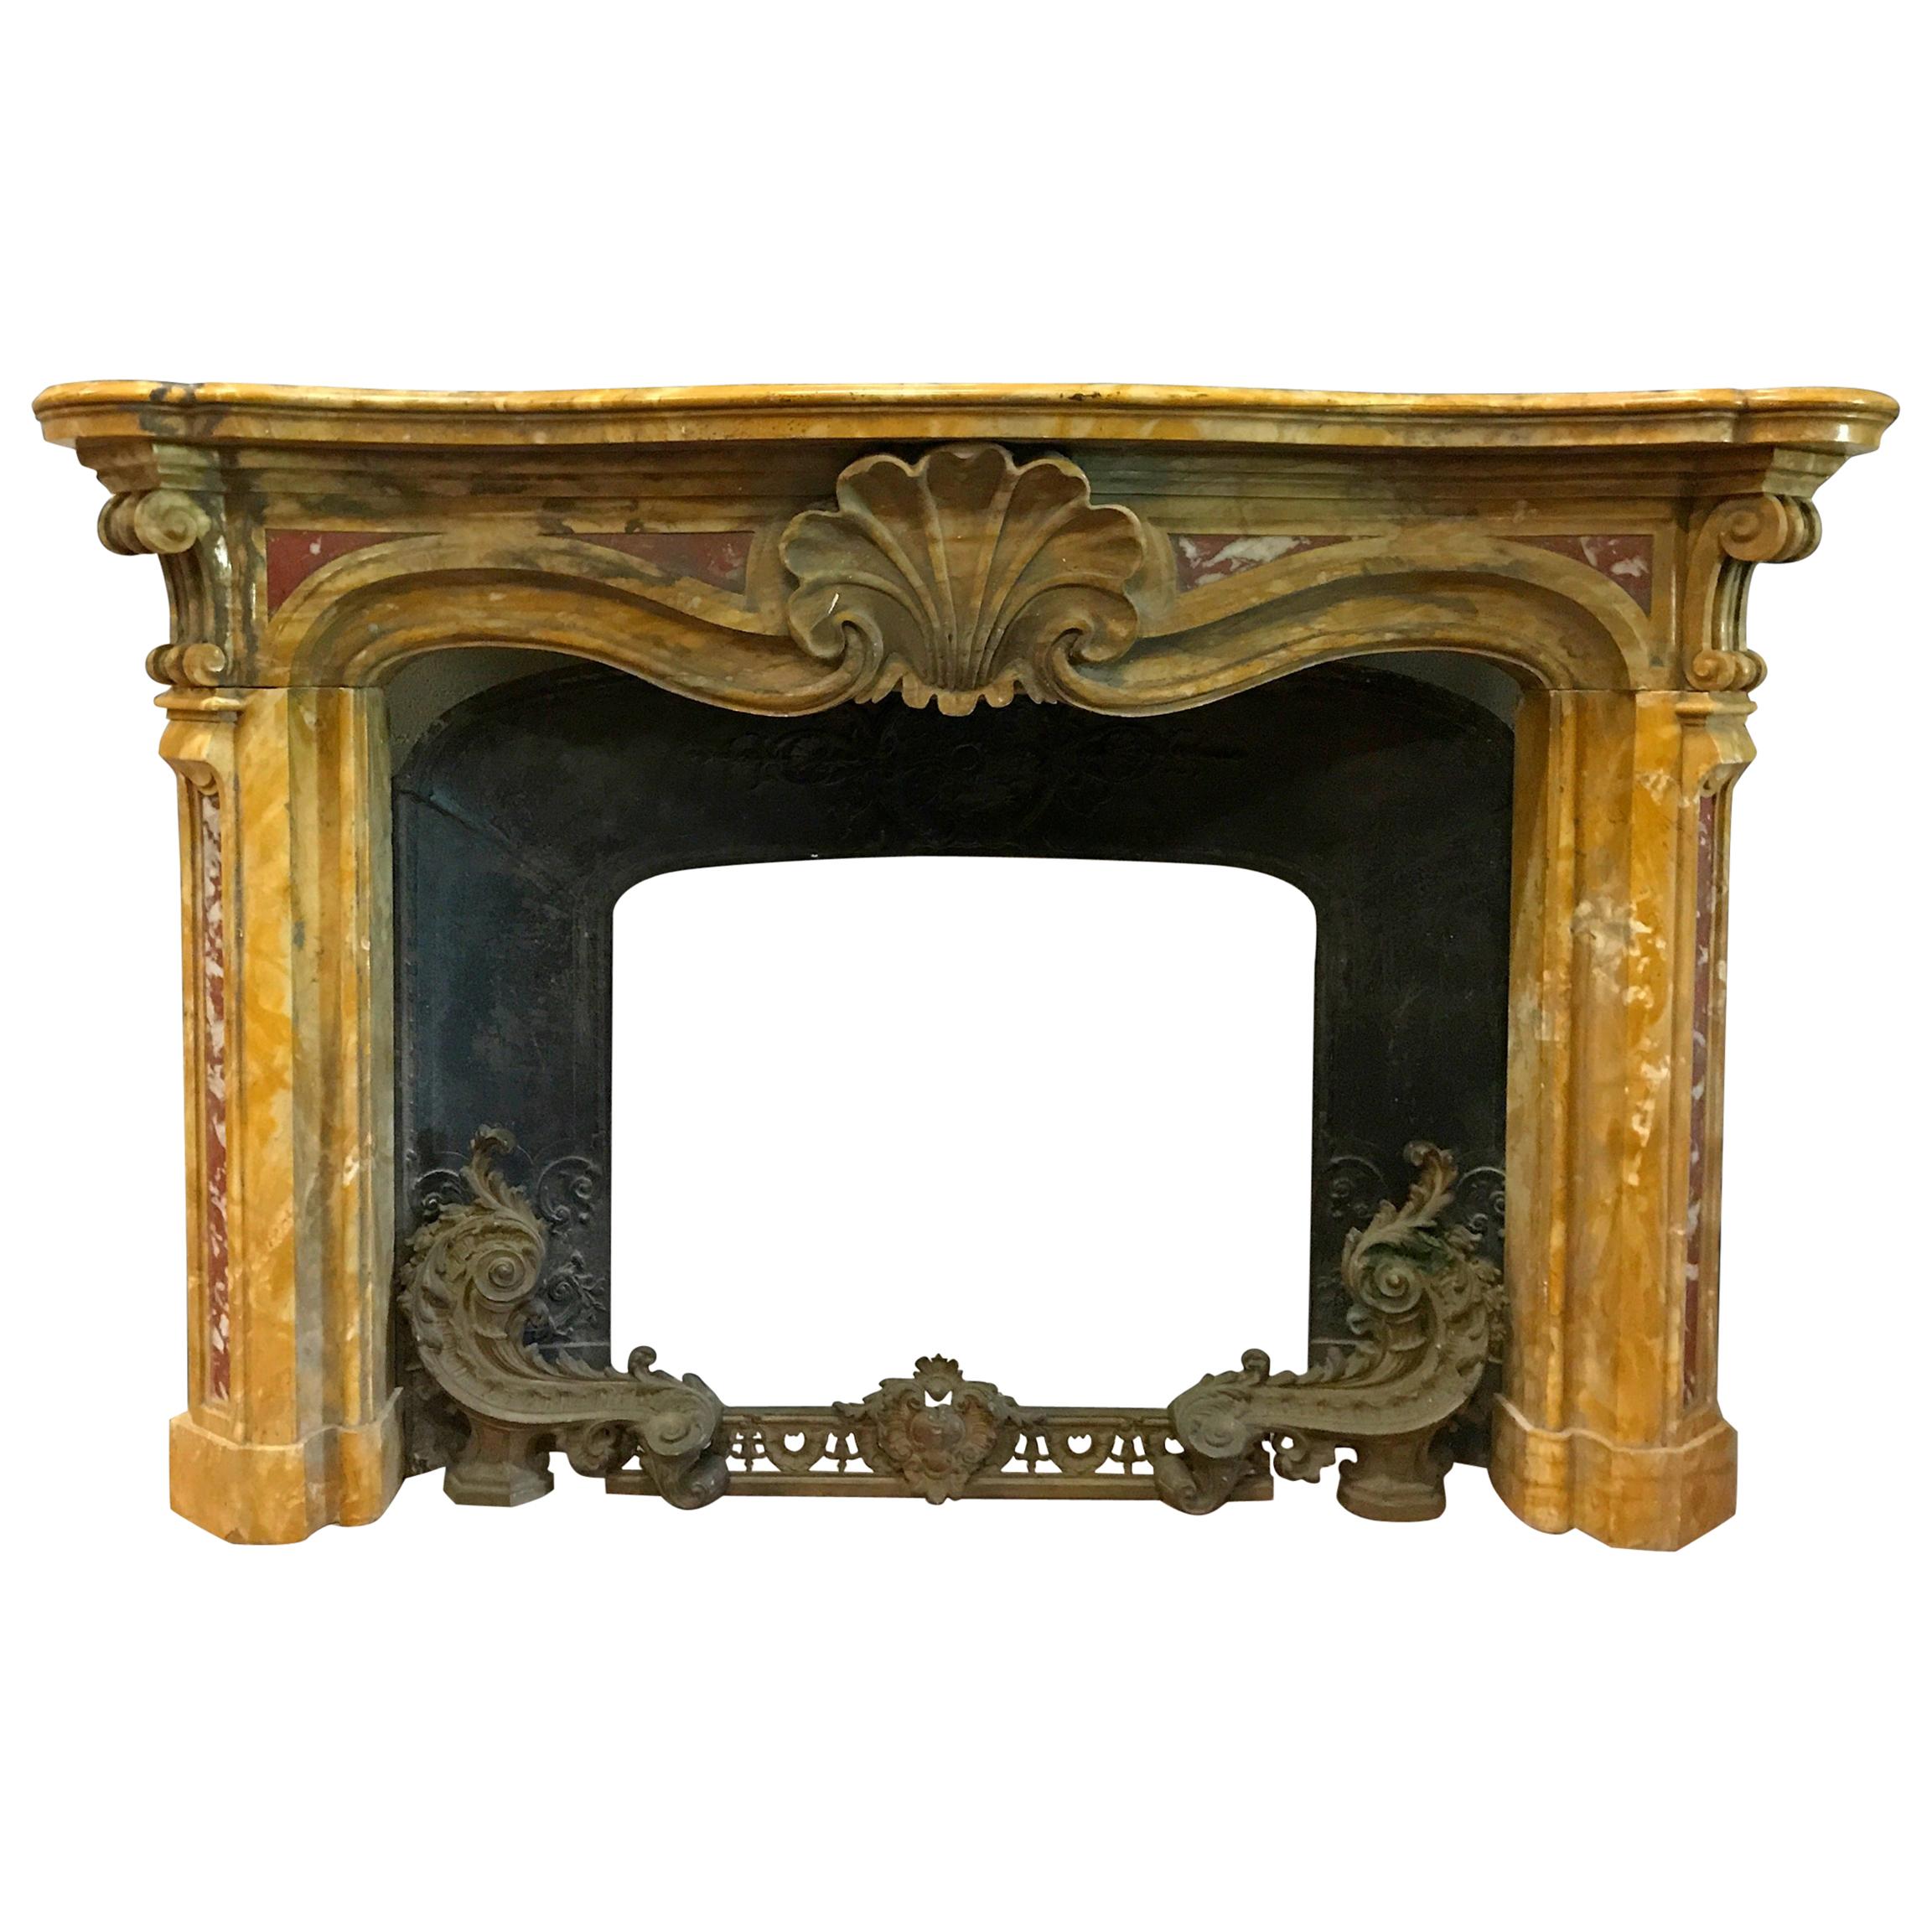 19th Century, Italian Carved Old Yellow Marble Fireplace